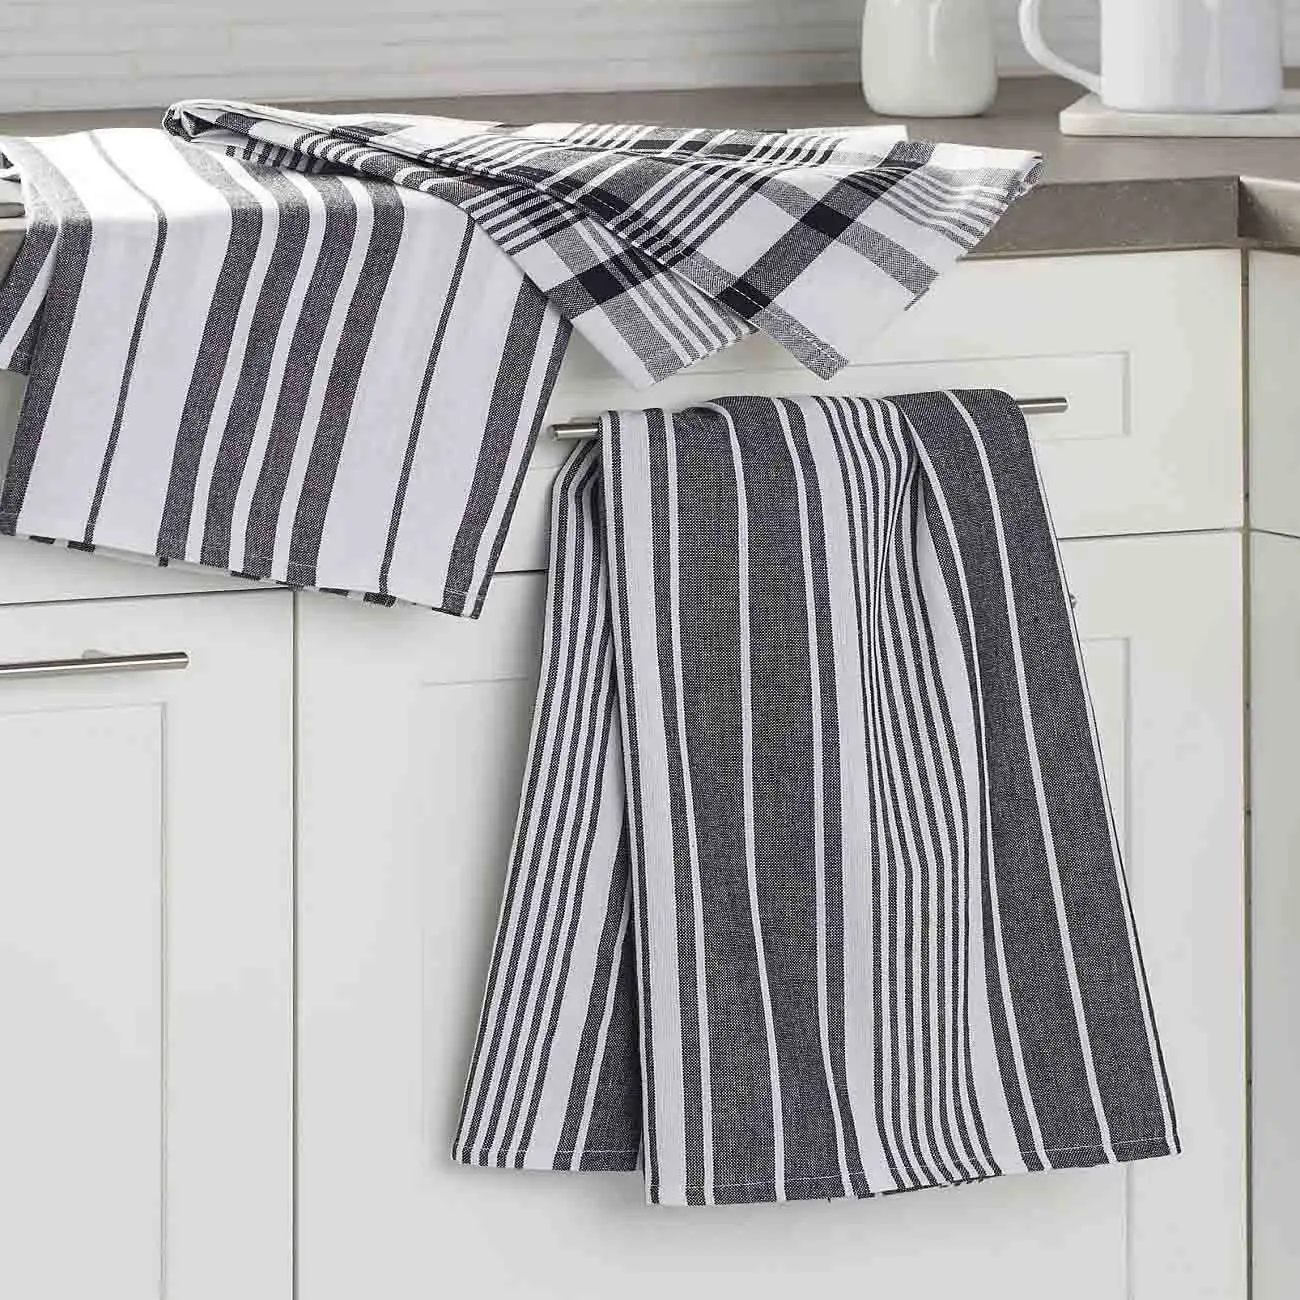 Good Quality 100% Cotton Black-White Check Striped Tea Towels Highly Absorb Washable Durable Kitchen Cleaning Towel Sustainable